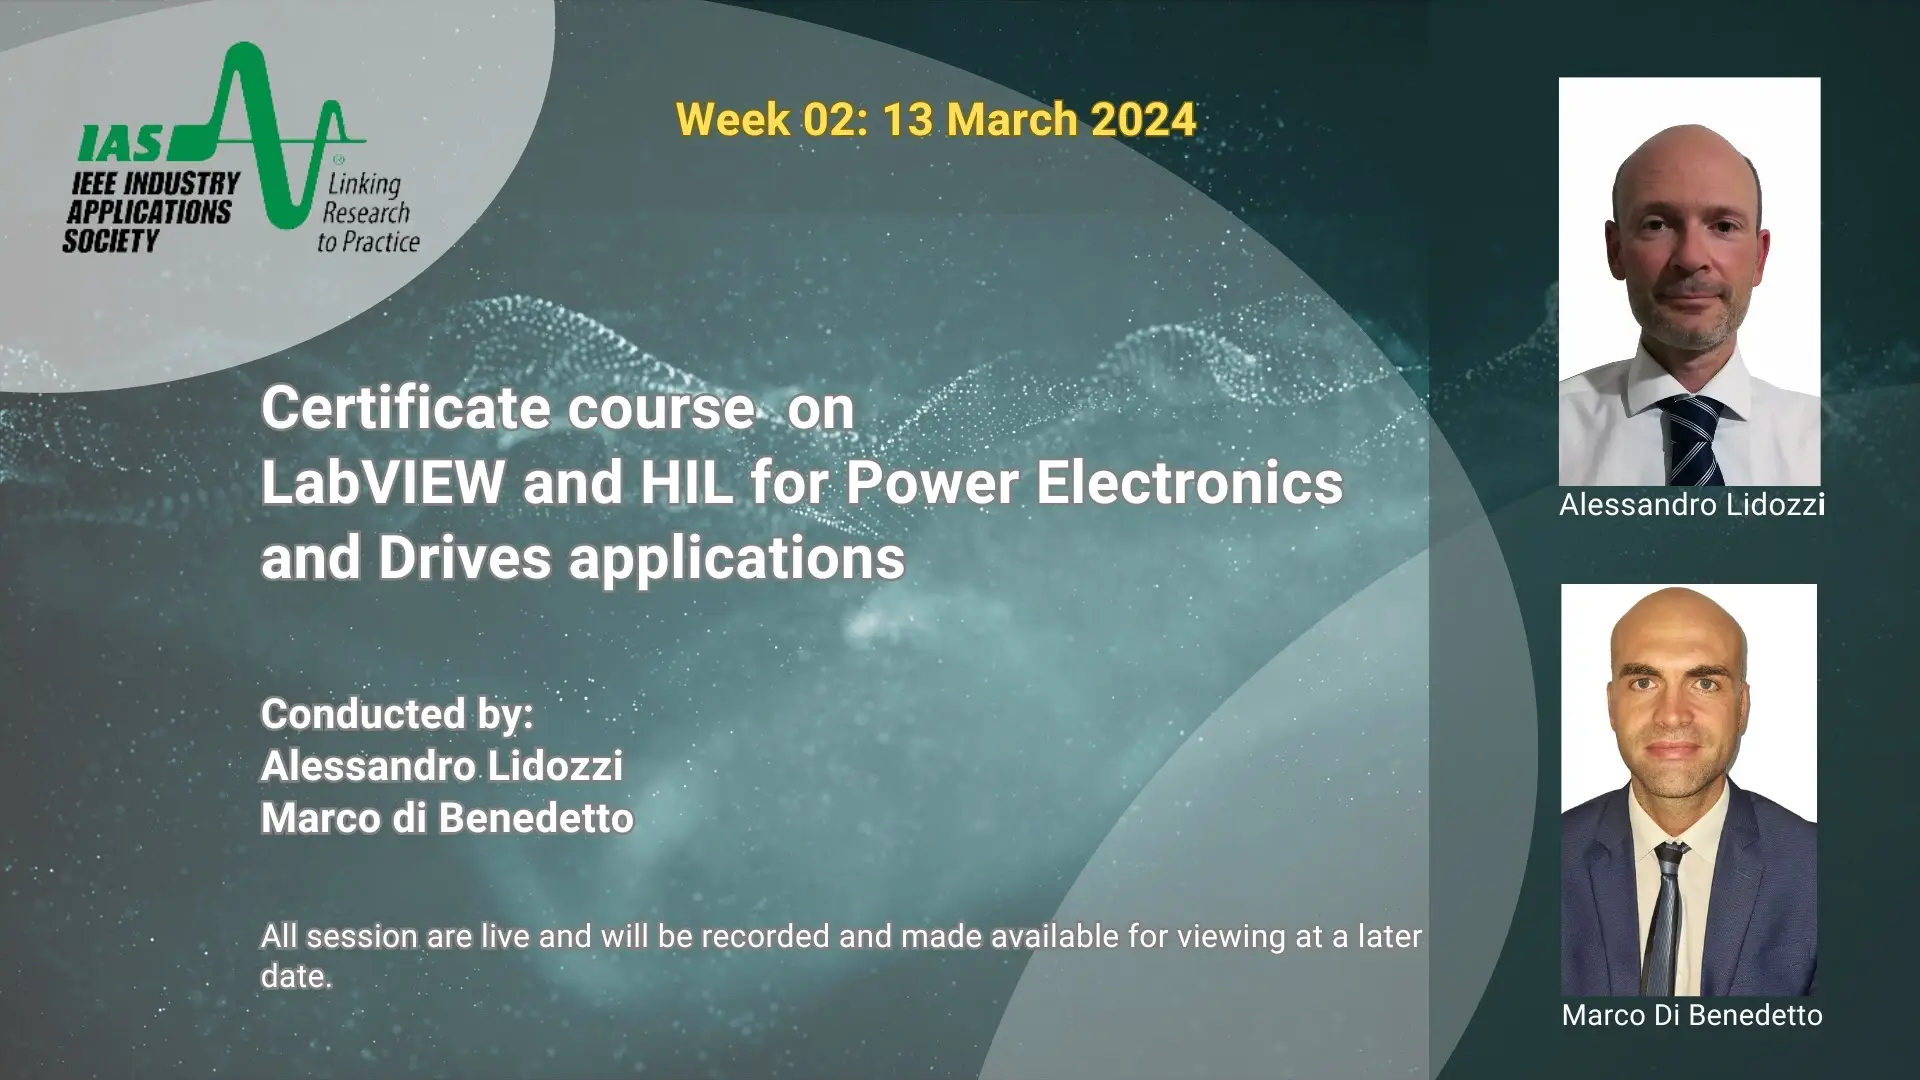 Week 02: Certificate Course on LabVIEW and HIL for Power Electronics and Drives Applications